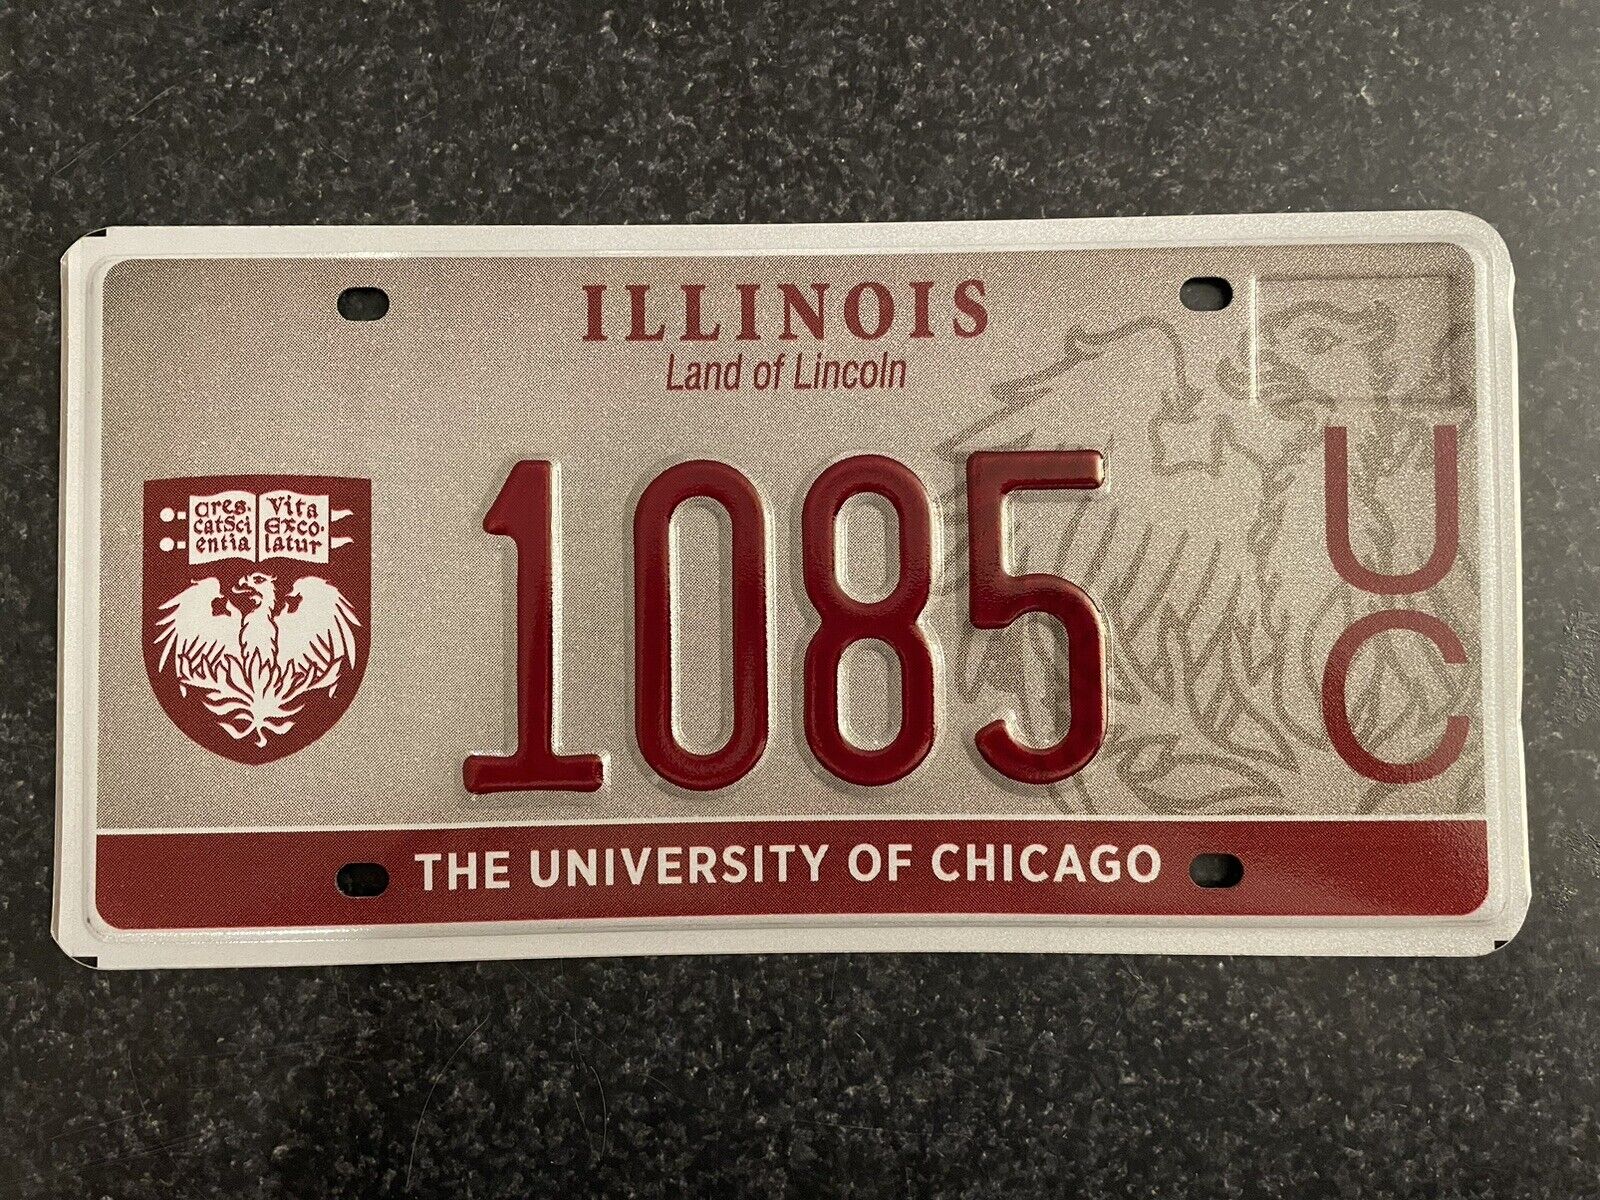 ILLINOIS THE UNIVERSITY OF CHICAGO LICENSE PLATE 1085 UC